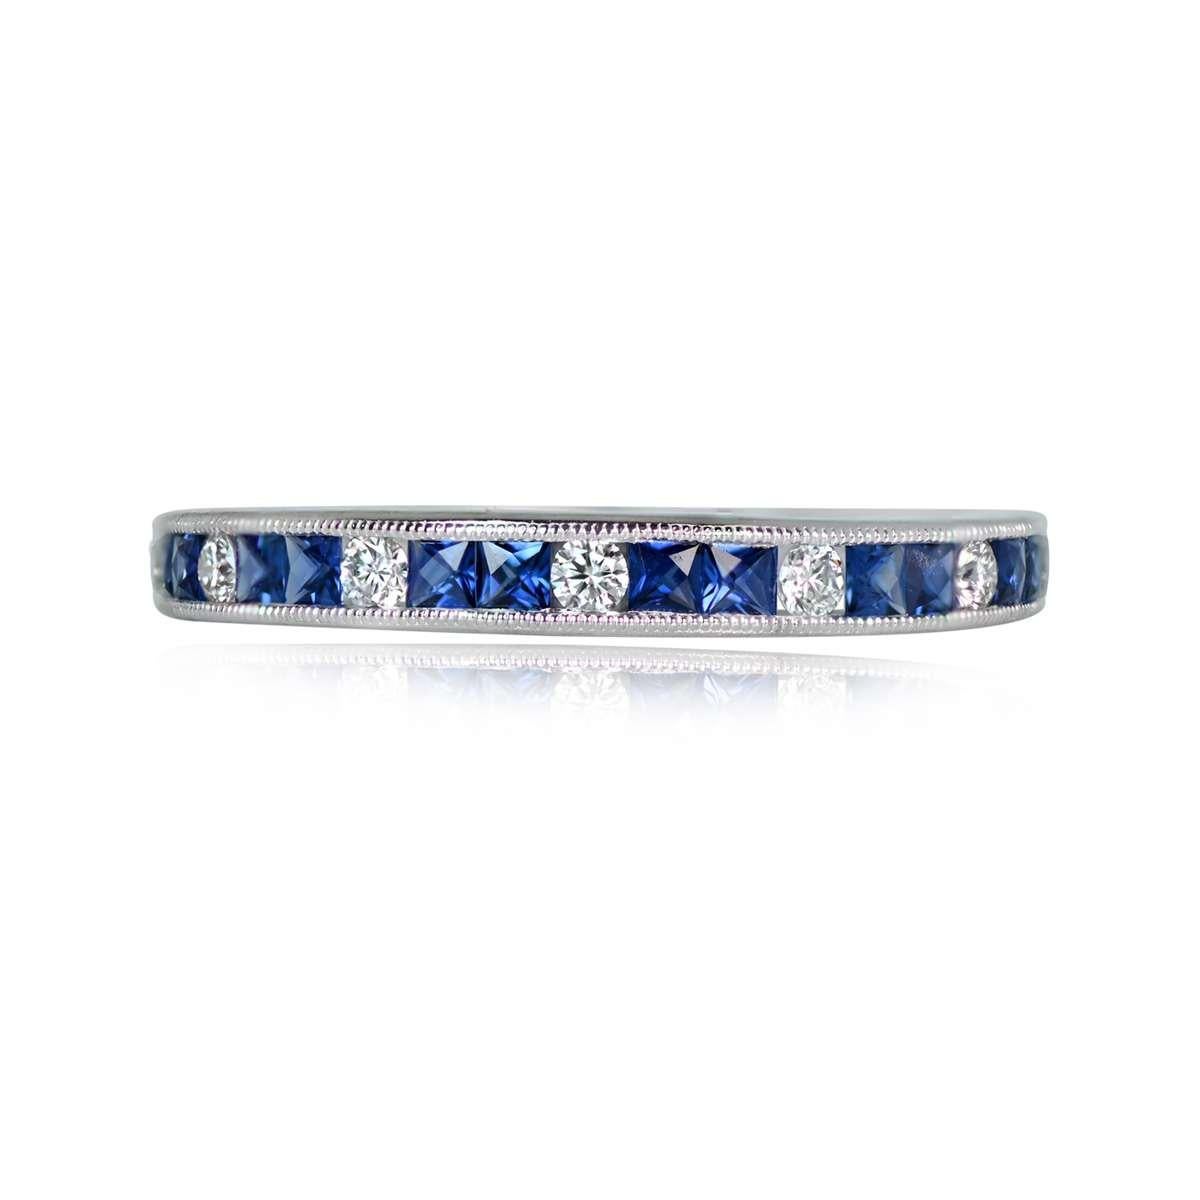 This exquisite half-eternity band is crafted in platinum, showcasing a captivating pattern of alternating round brilliant-cut diamonds and two natural blue French-cut sapphires. The stones are meticulously channel-set, and delicate milgrain